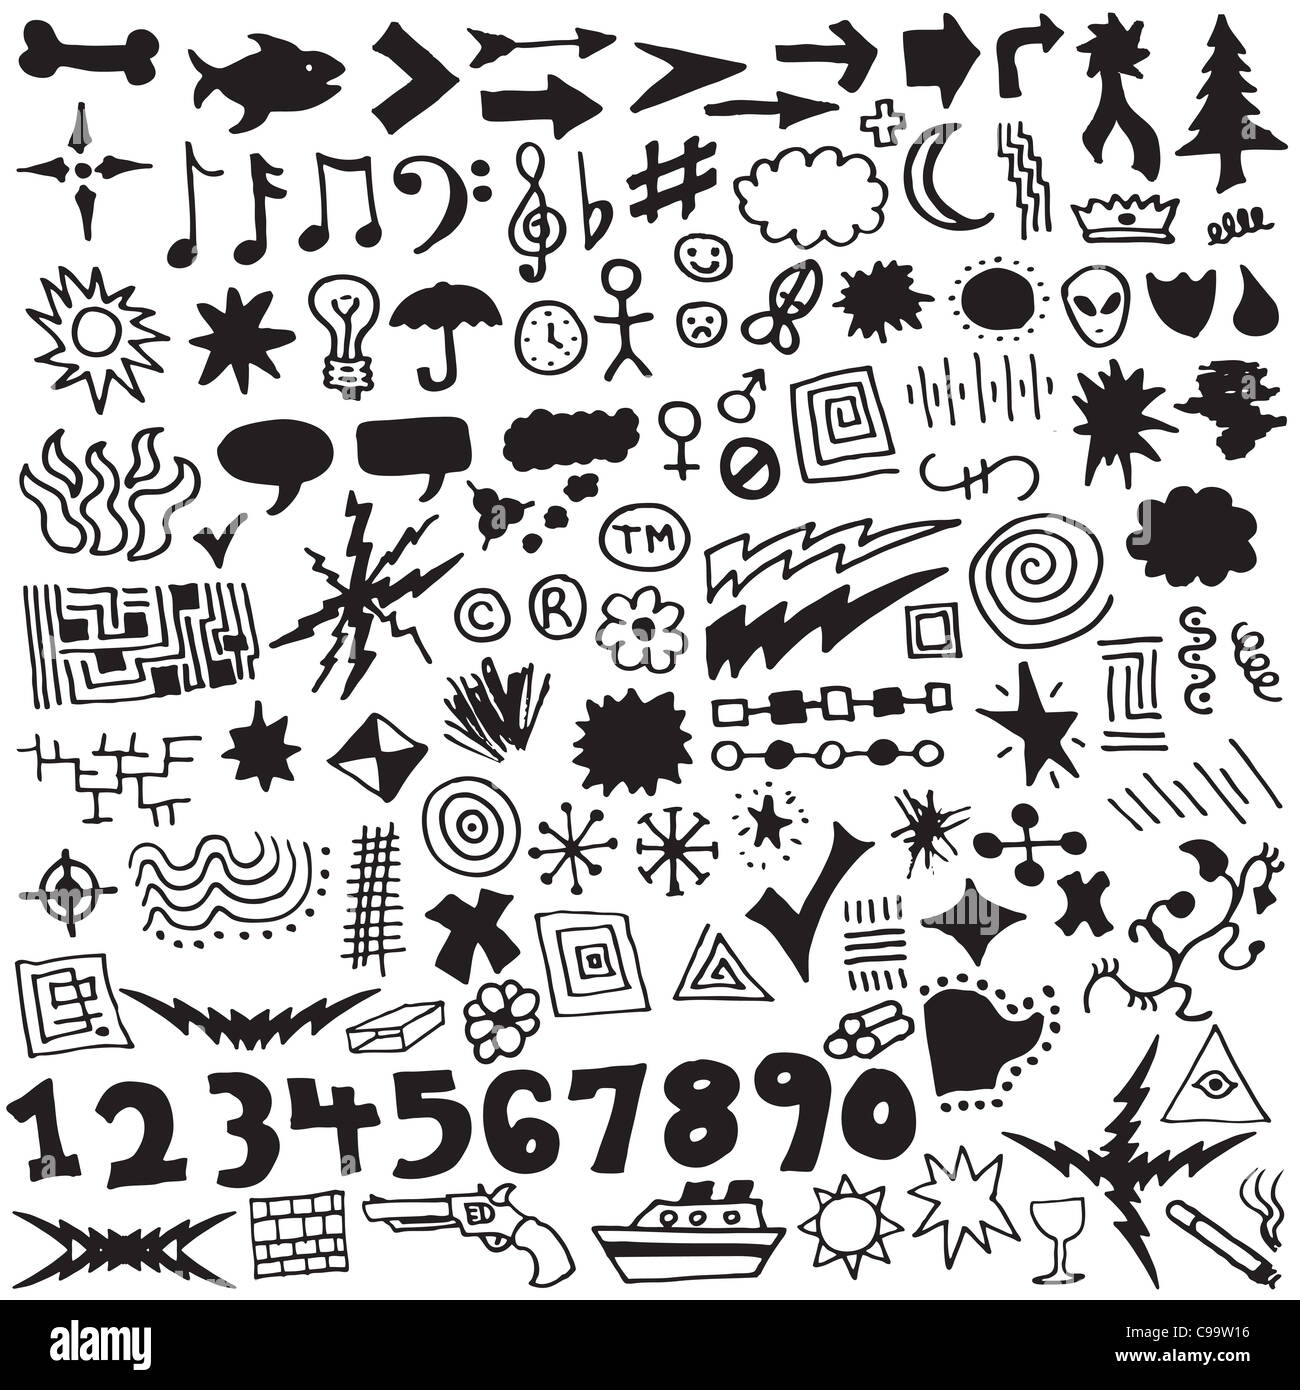 Collection of over 120 unique, hand-drawn design elements. Stock Photo